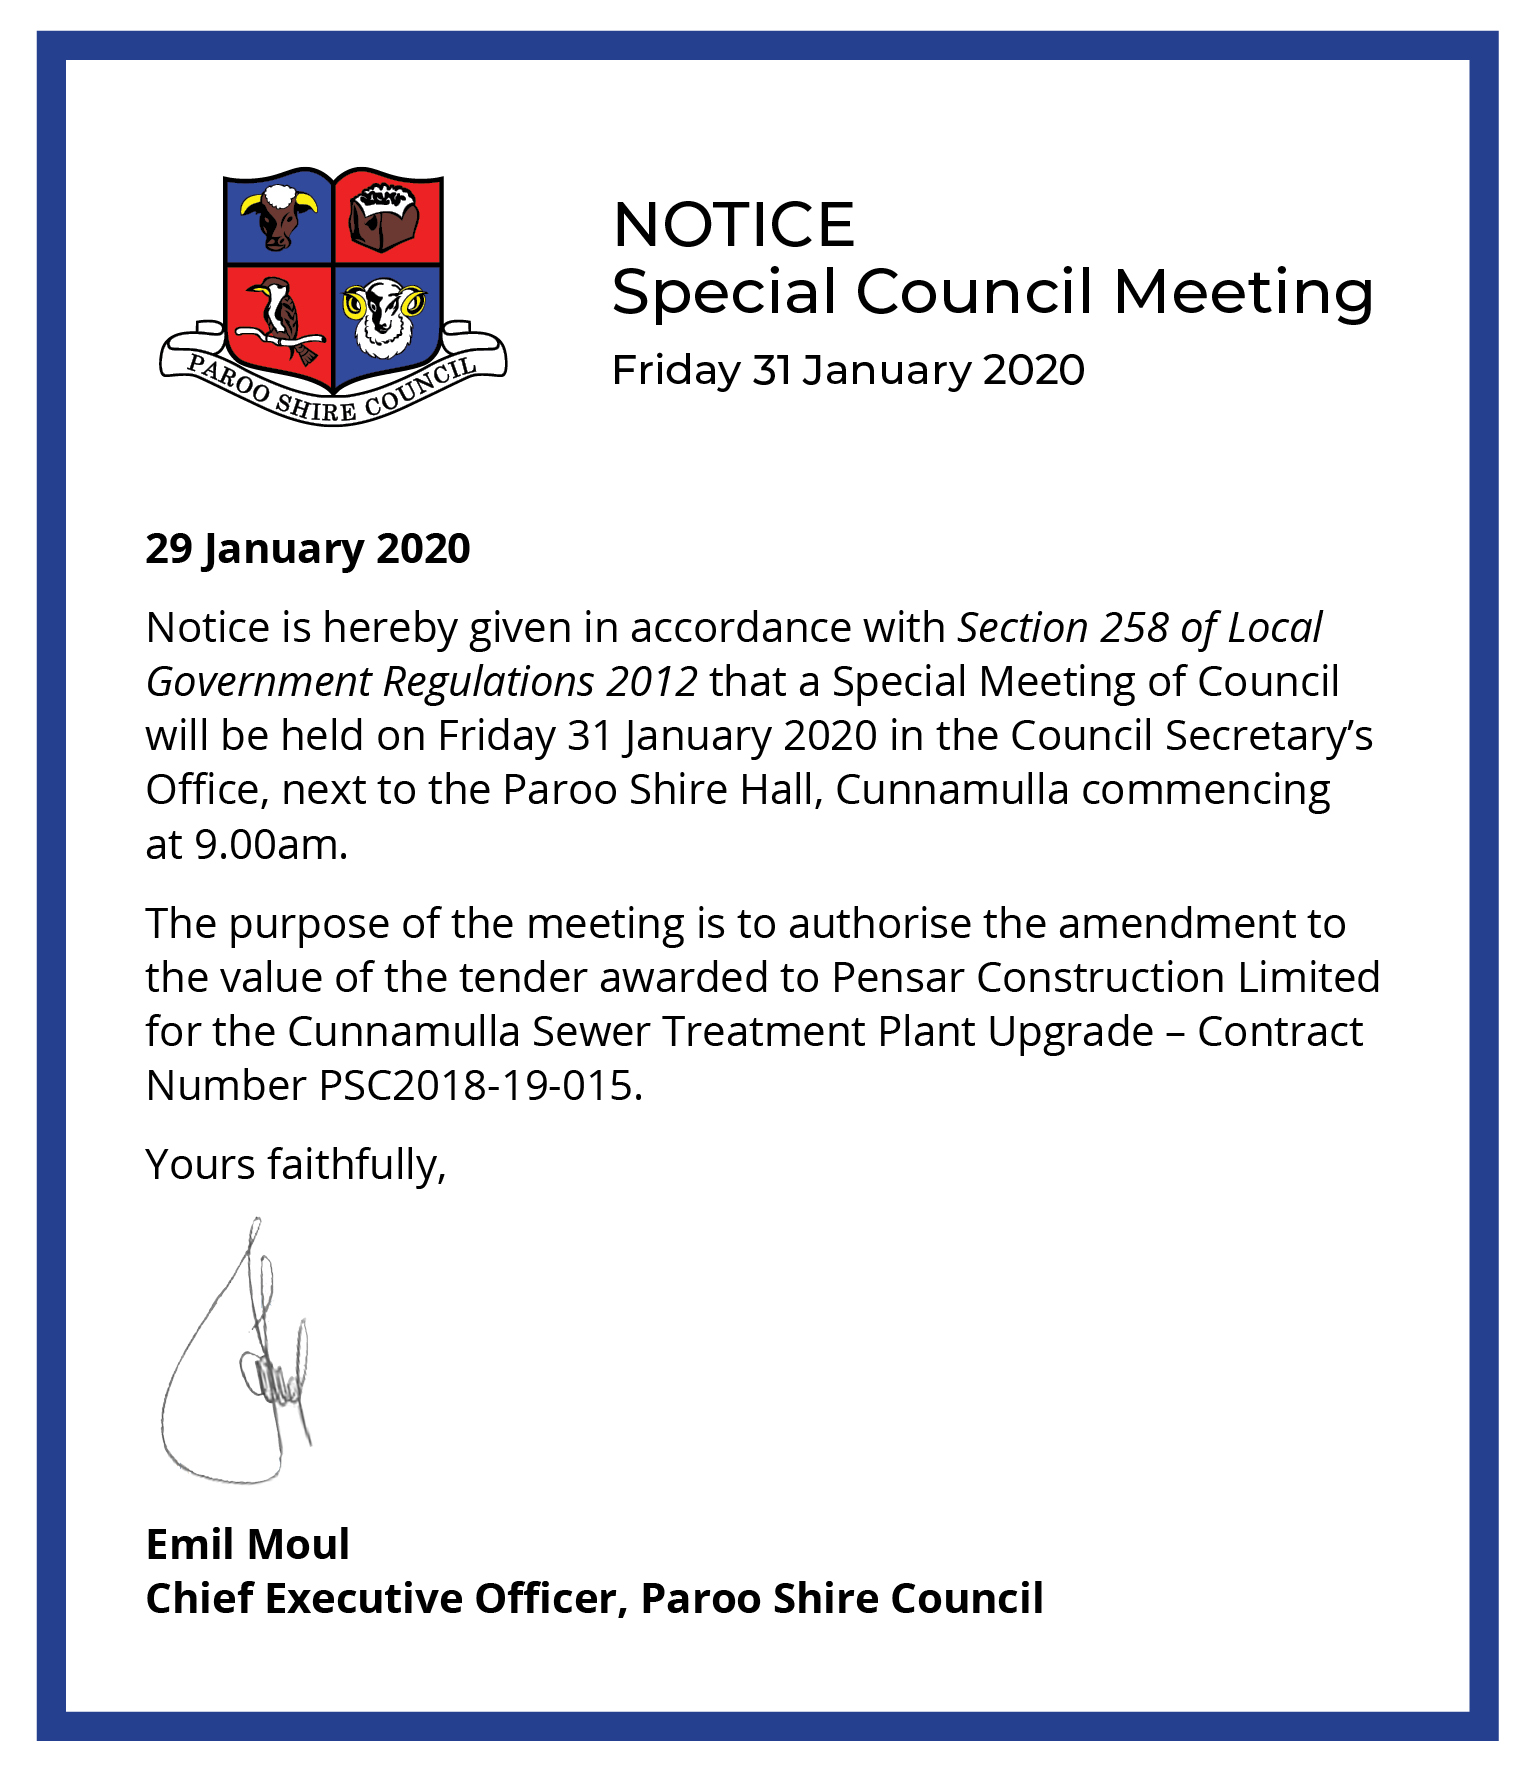 Special meeting notice - 31January 2020